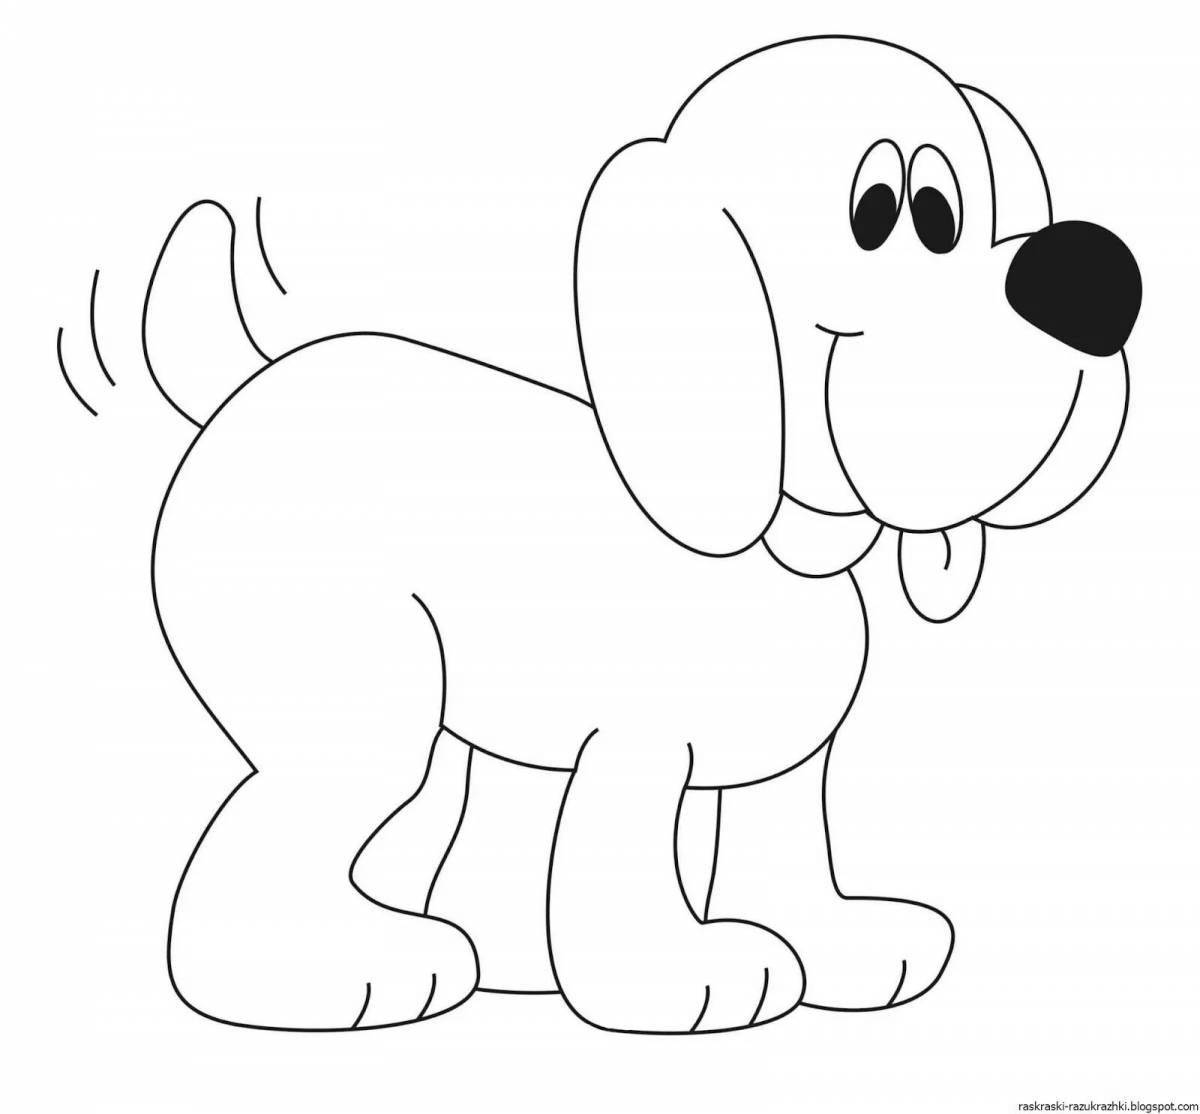 Cute dog coloring book for 4-5 year olds